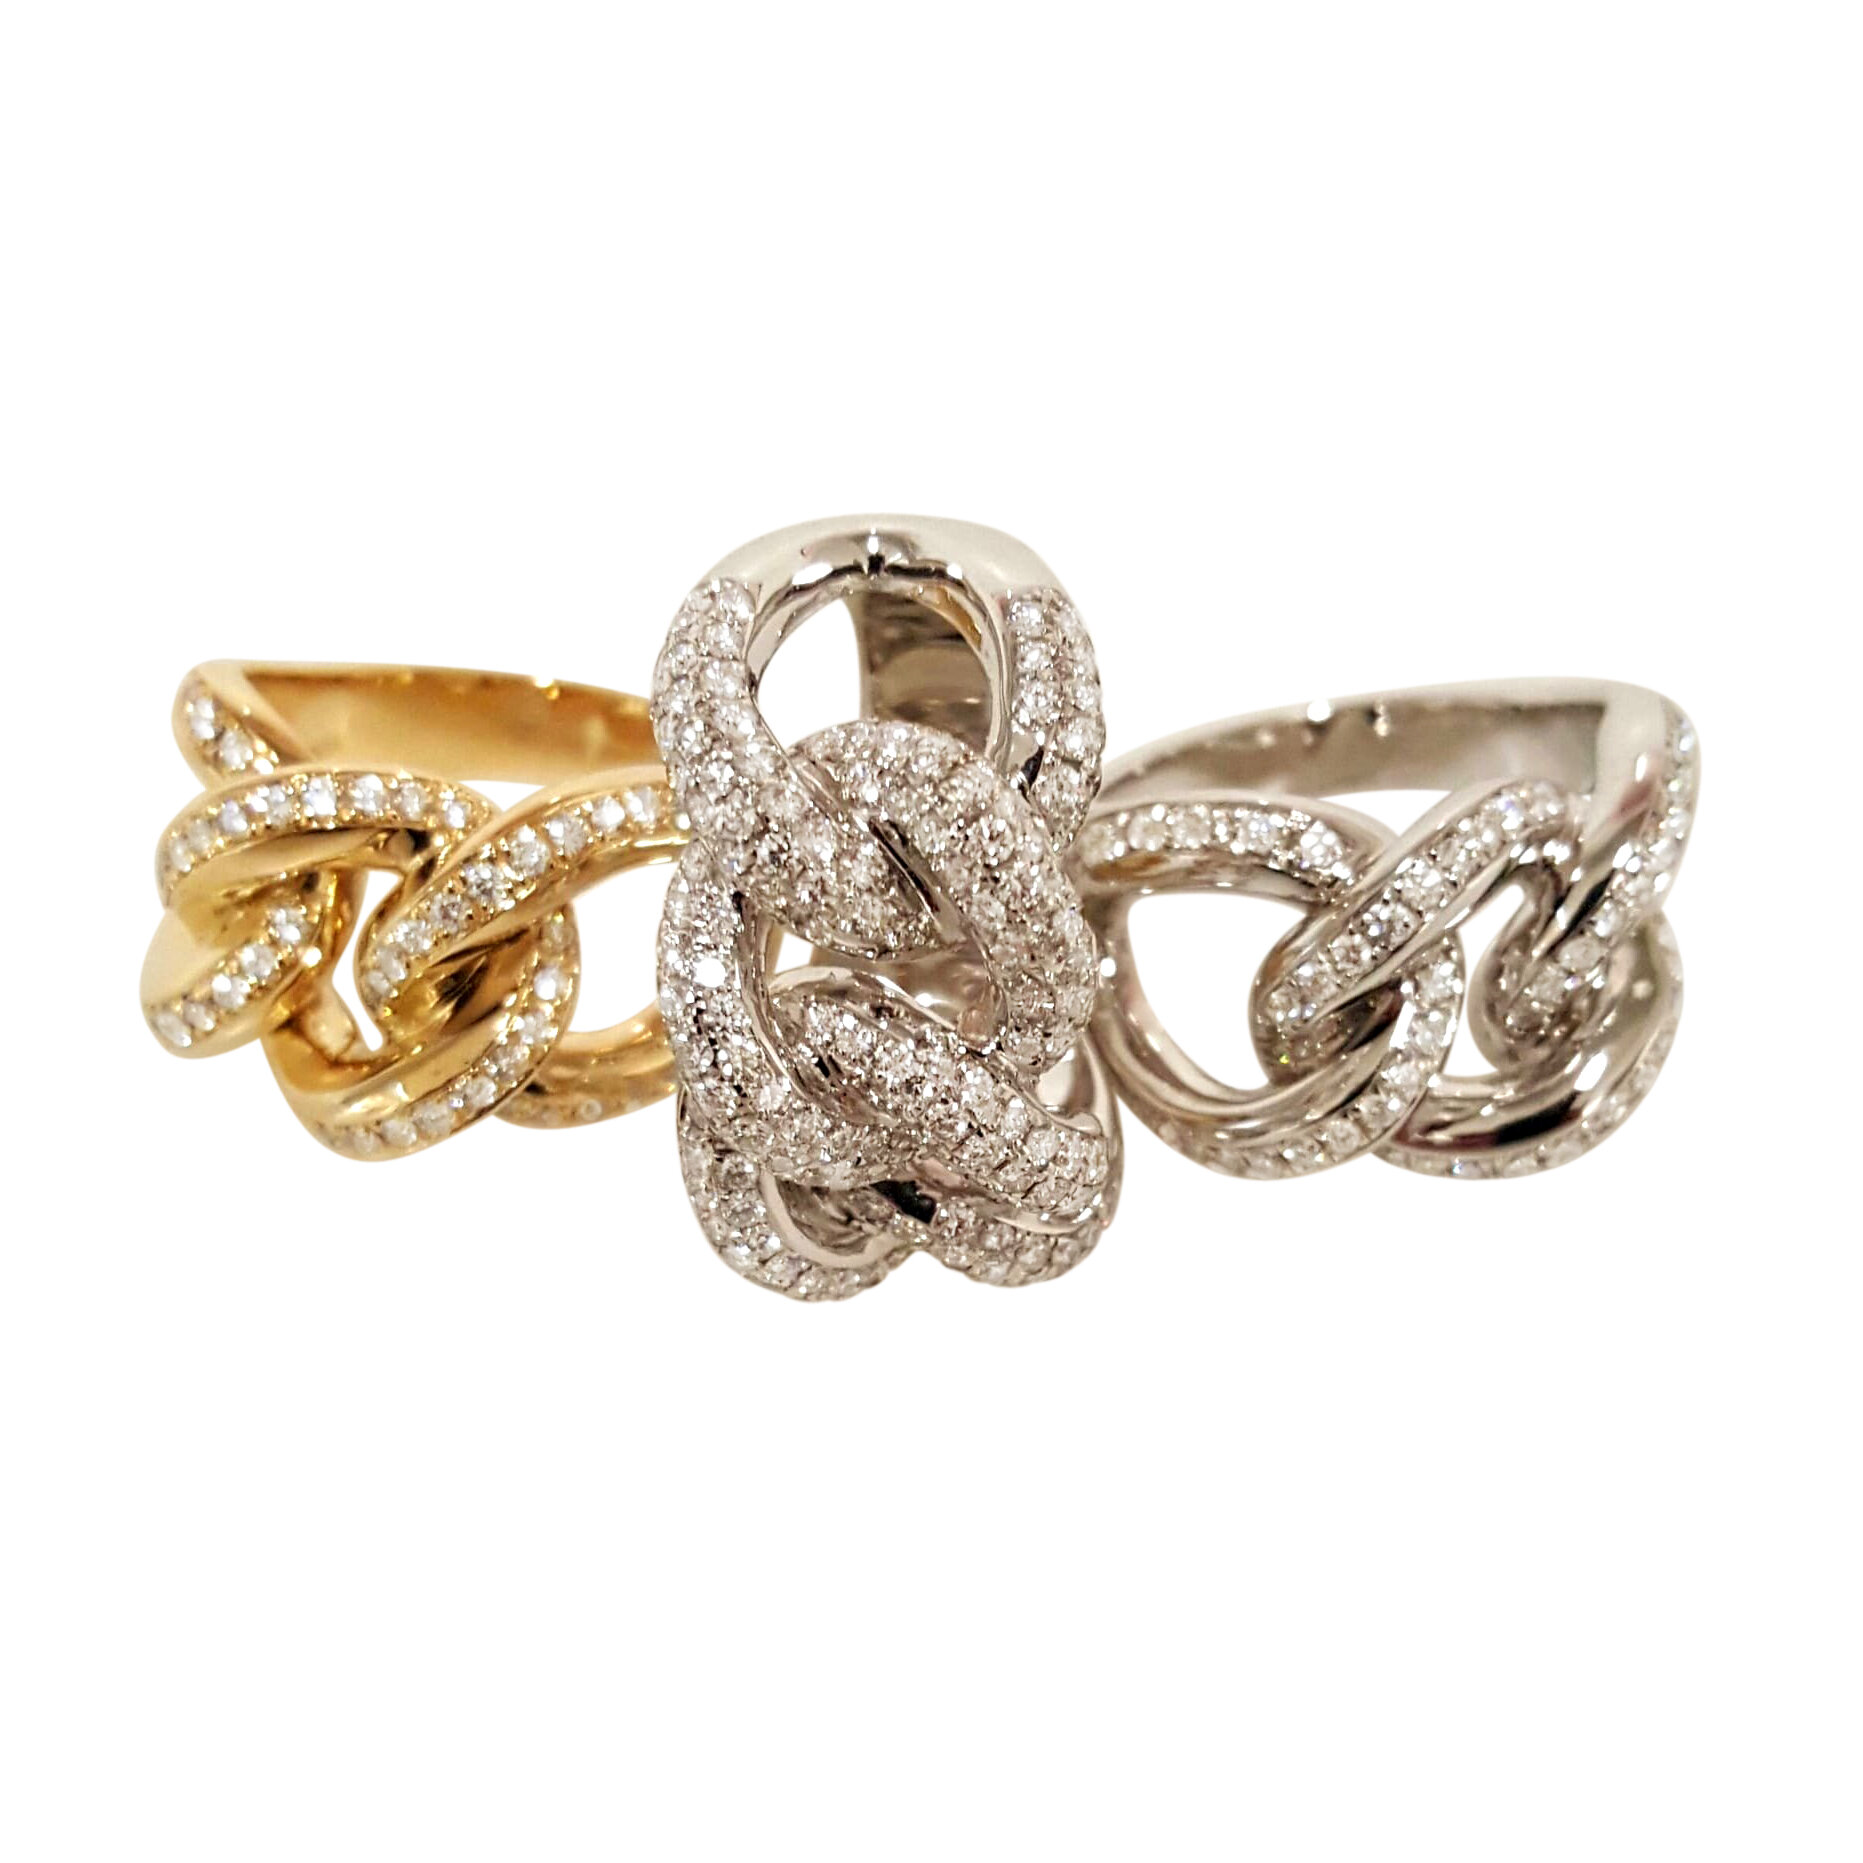 Matthia’s &amp; Claire Jewelry : 18K Yellow Gold Precious Links Ring with Diamonds, $7,095